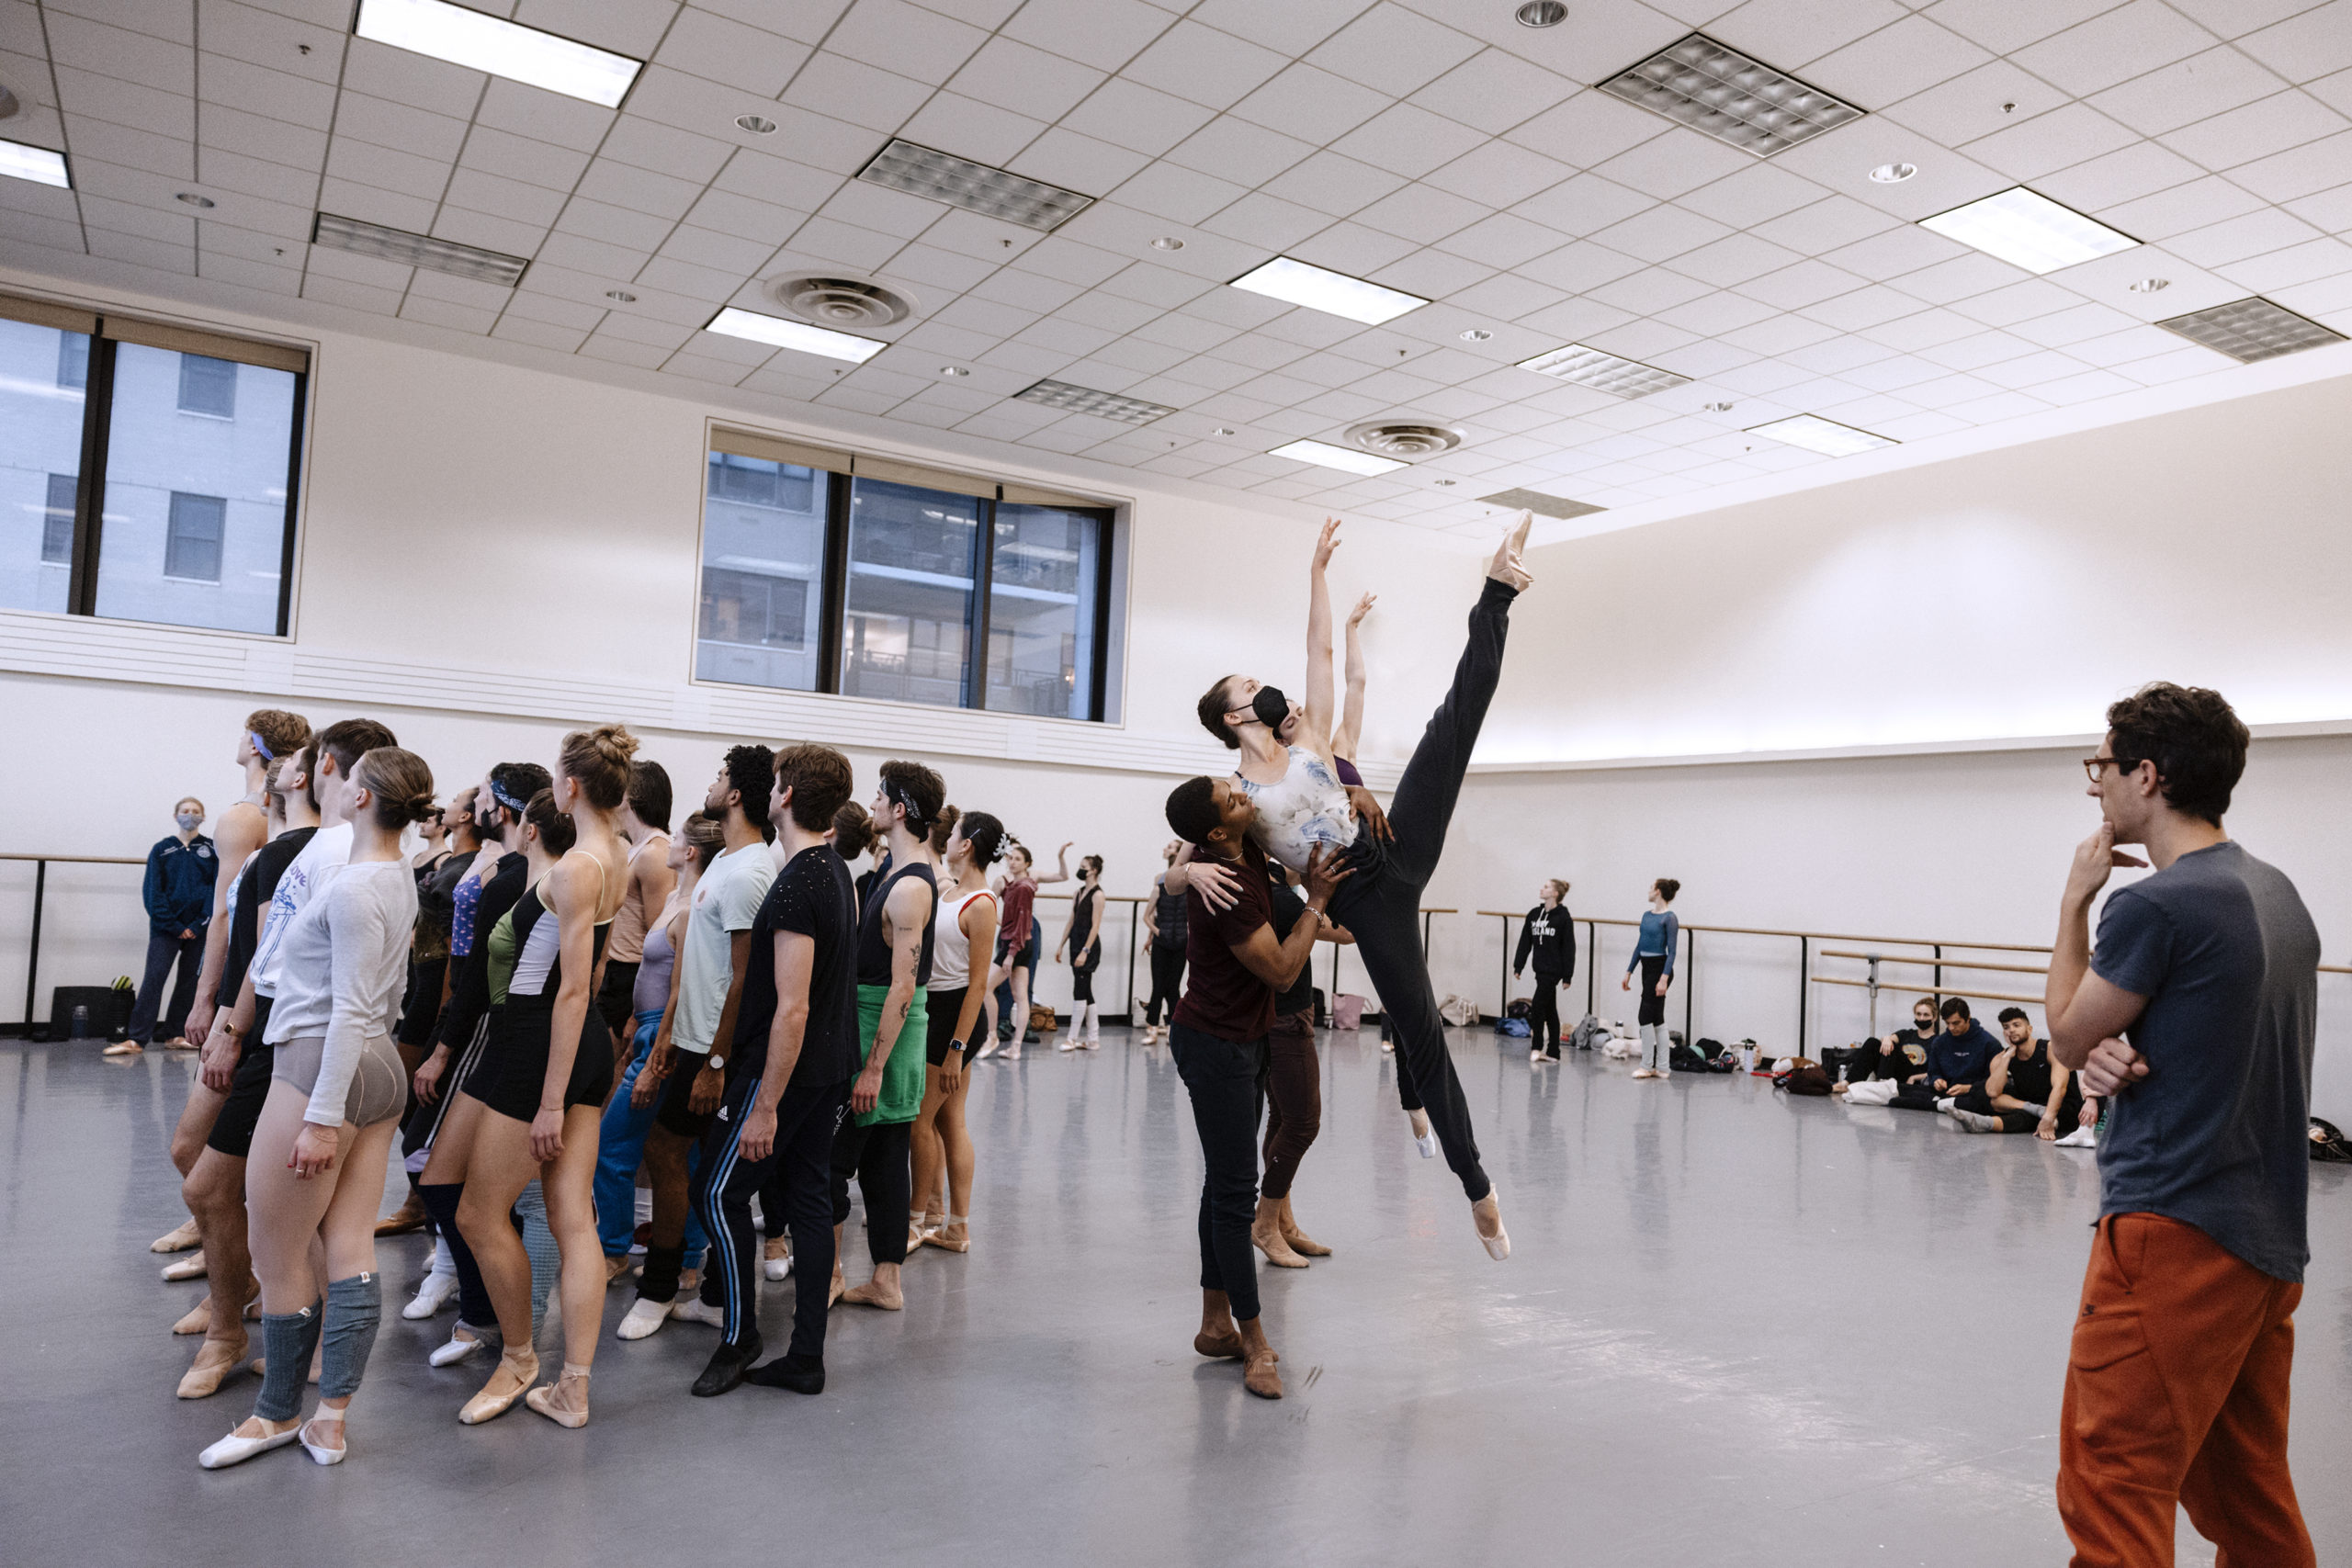 In a large dance studio, a big group of male and female dancers stand in a clump toward the middle of the studio. To the left of them, two pairs of male and female partners perform a supported lift, with the women leaning against their partners in an airborne a la seconde position. Justin Peck, in a red shirt and black pants, stands to the far right and watches the dancers.